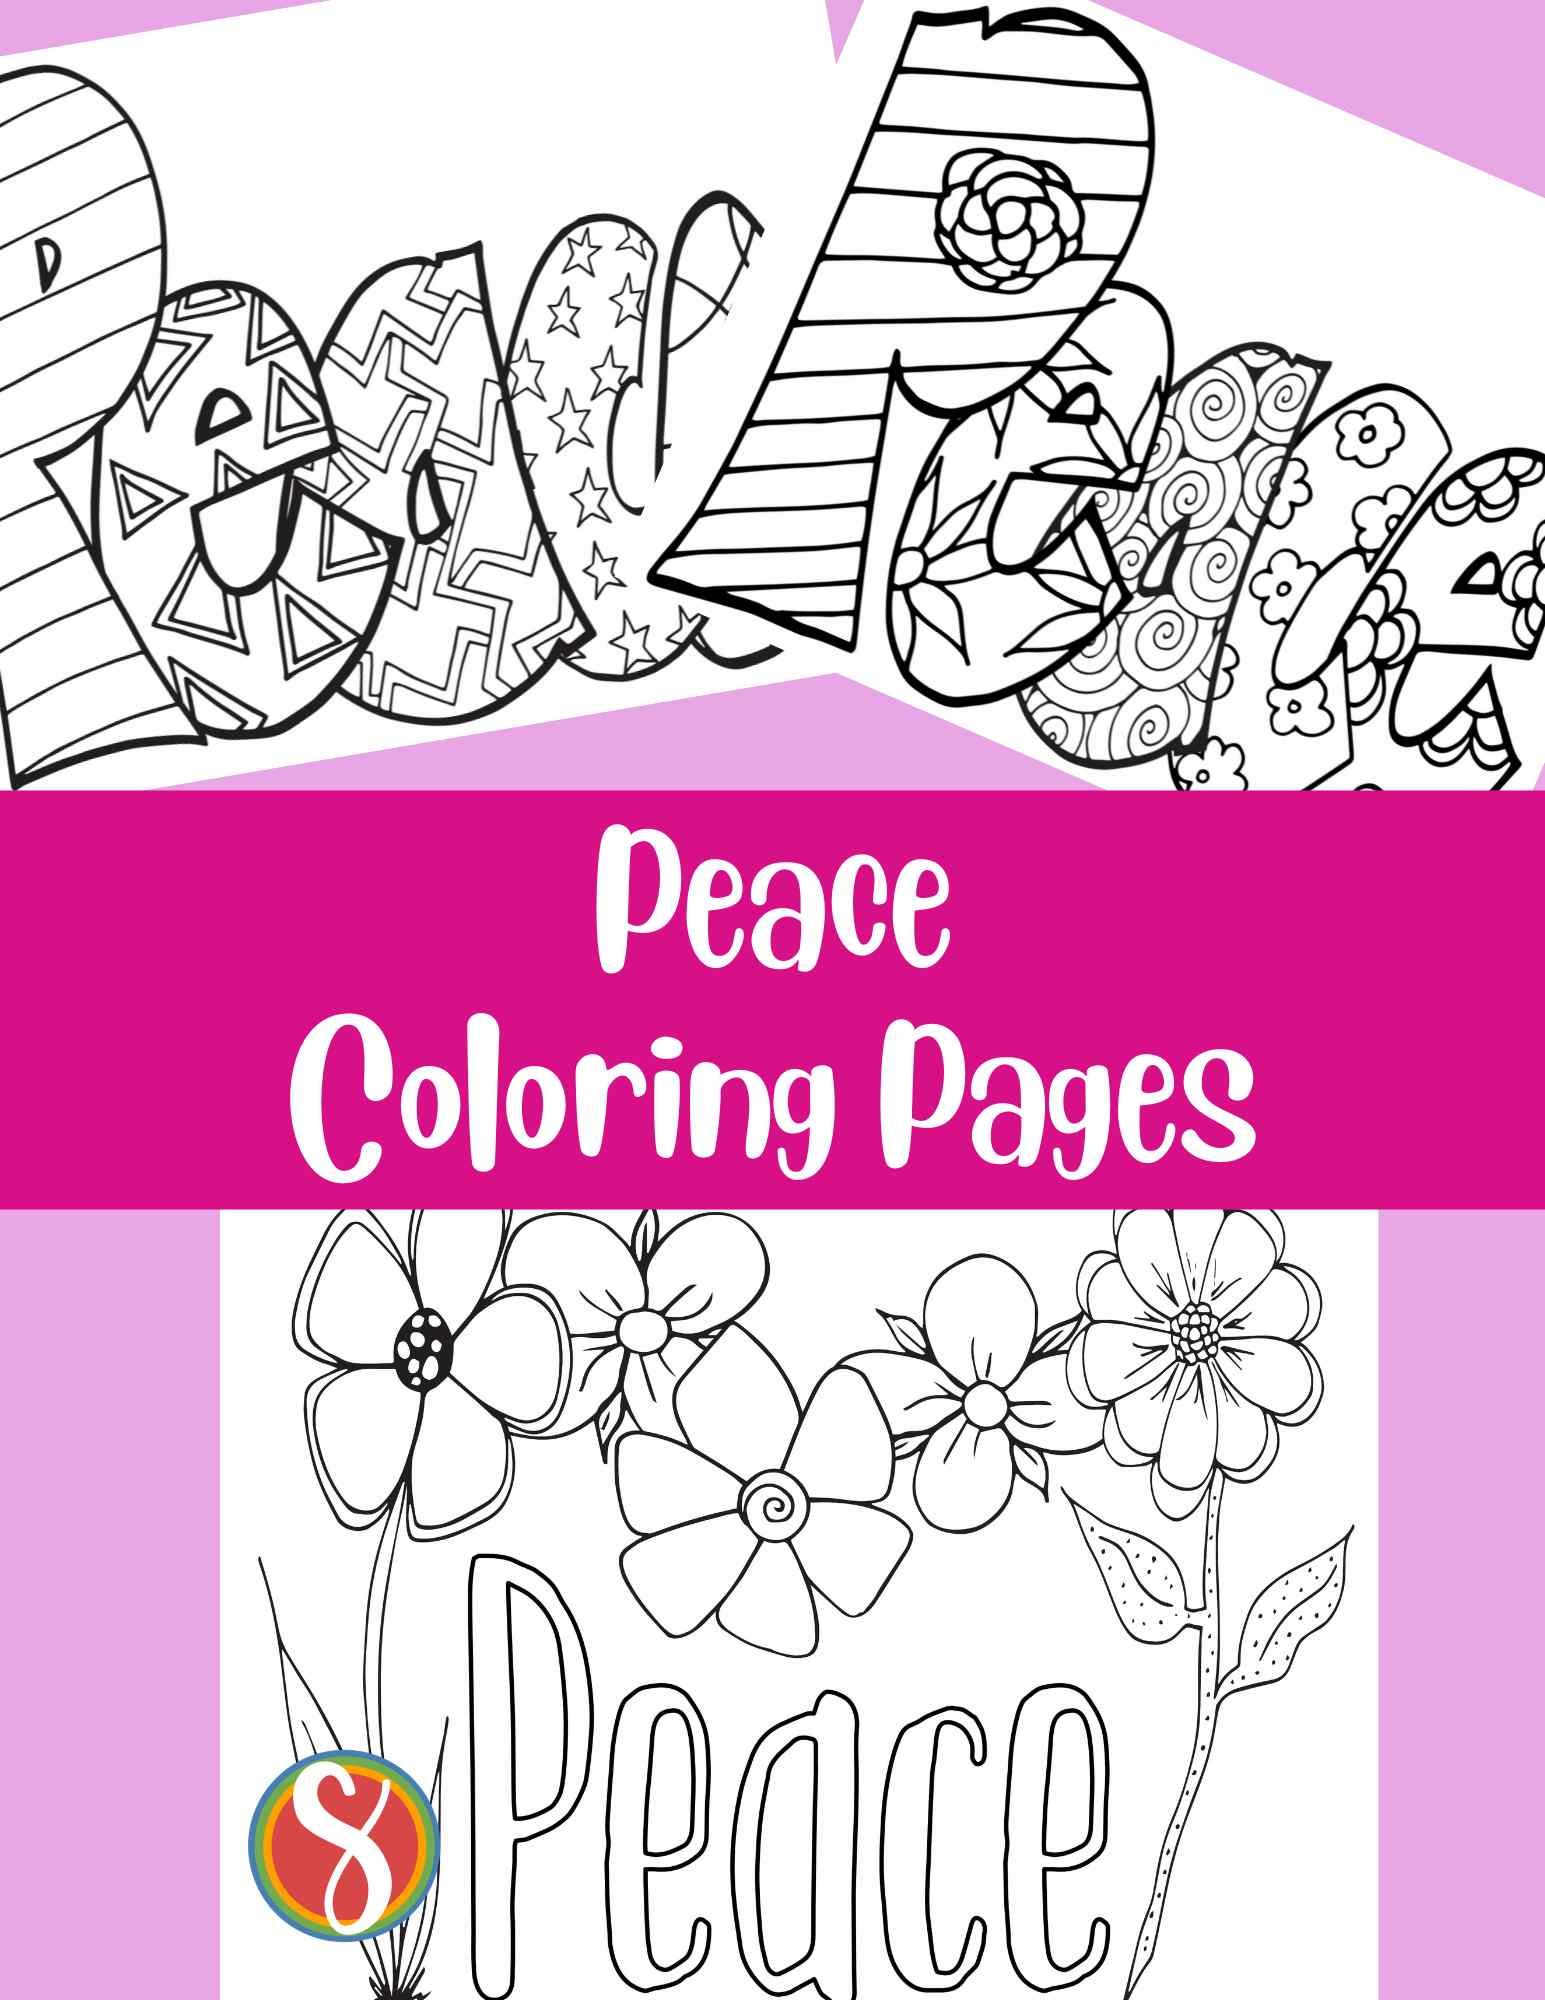 collage of peace coloring pages on a lilac background